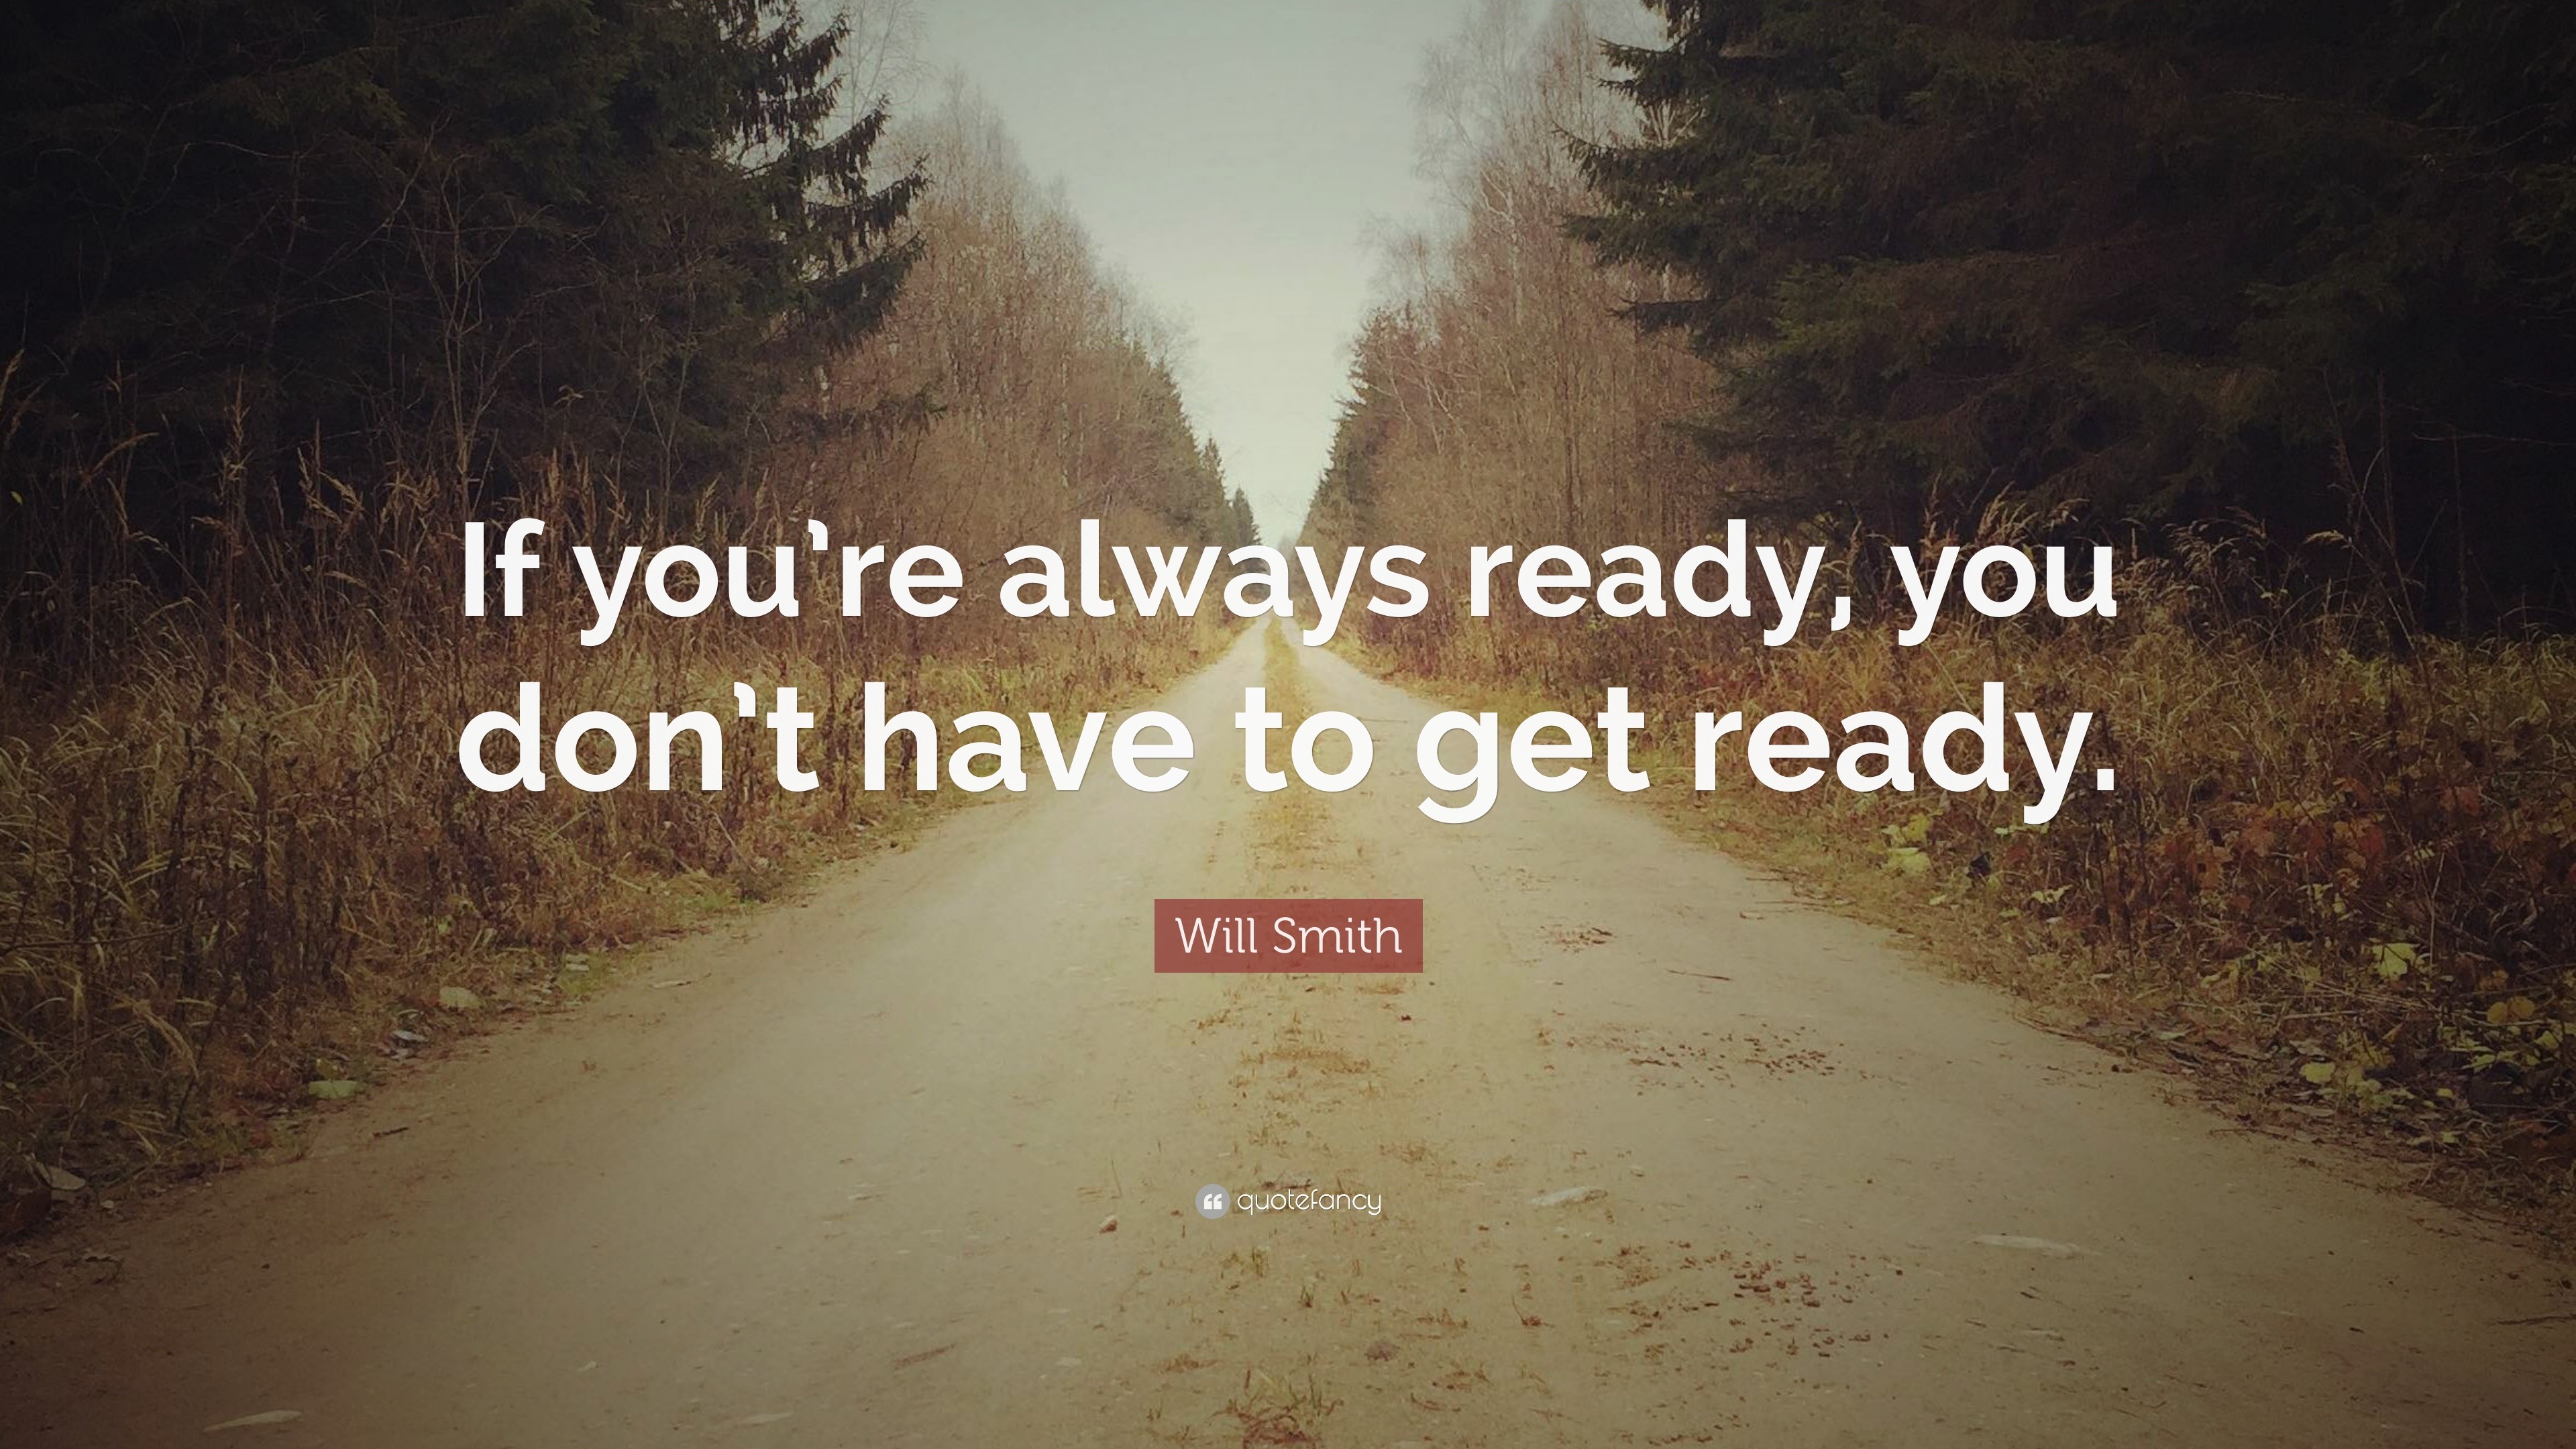 Will Smith Quote: “If you're always ready, you don't have to get ready.”